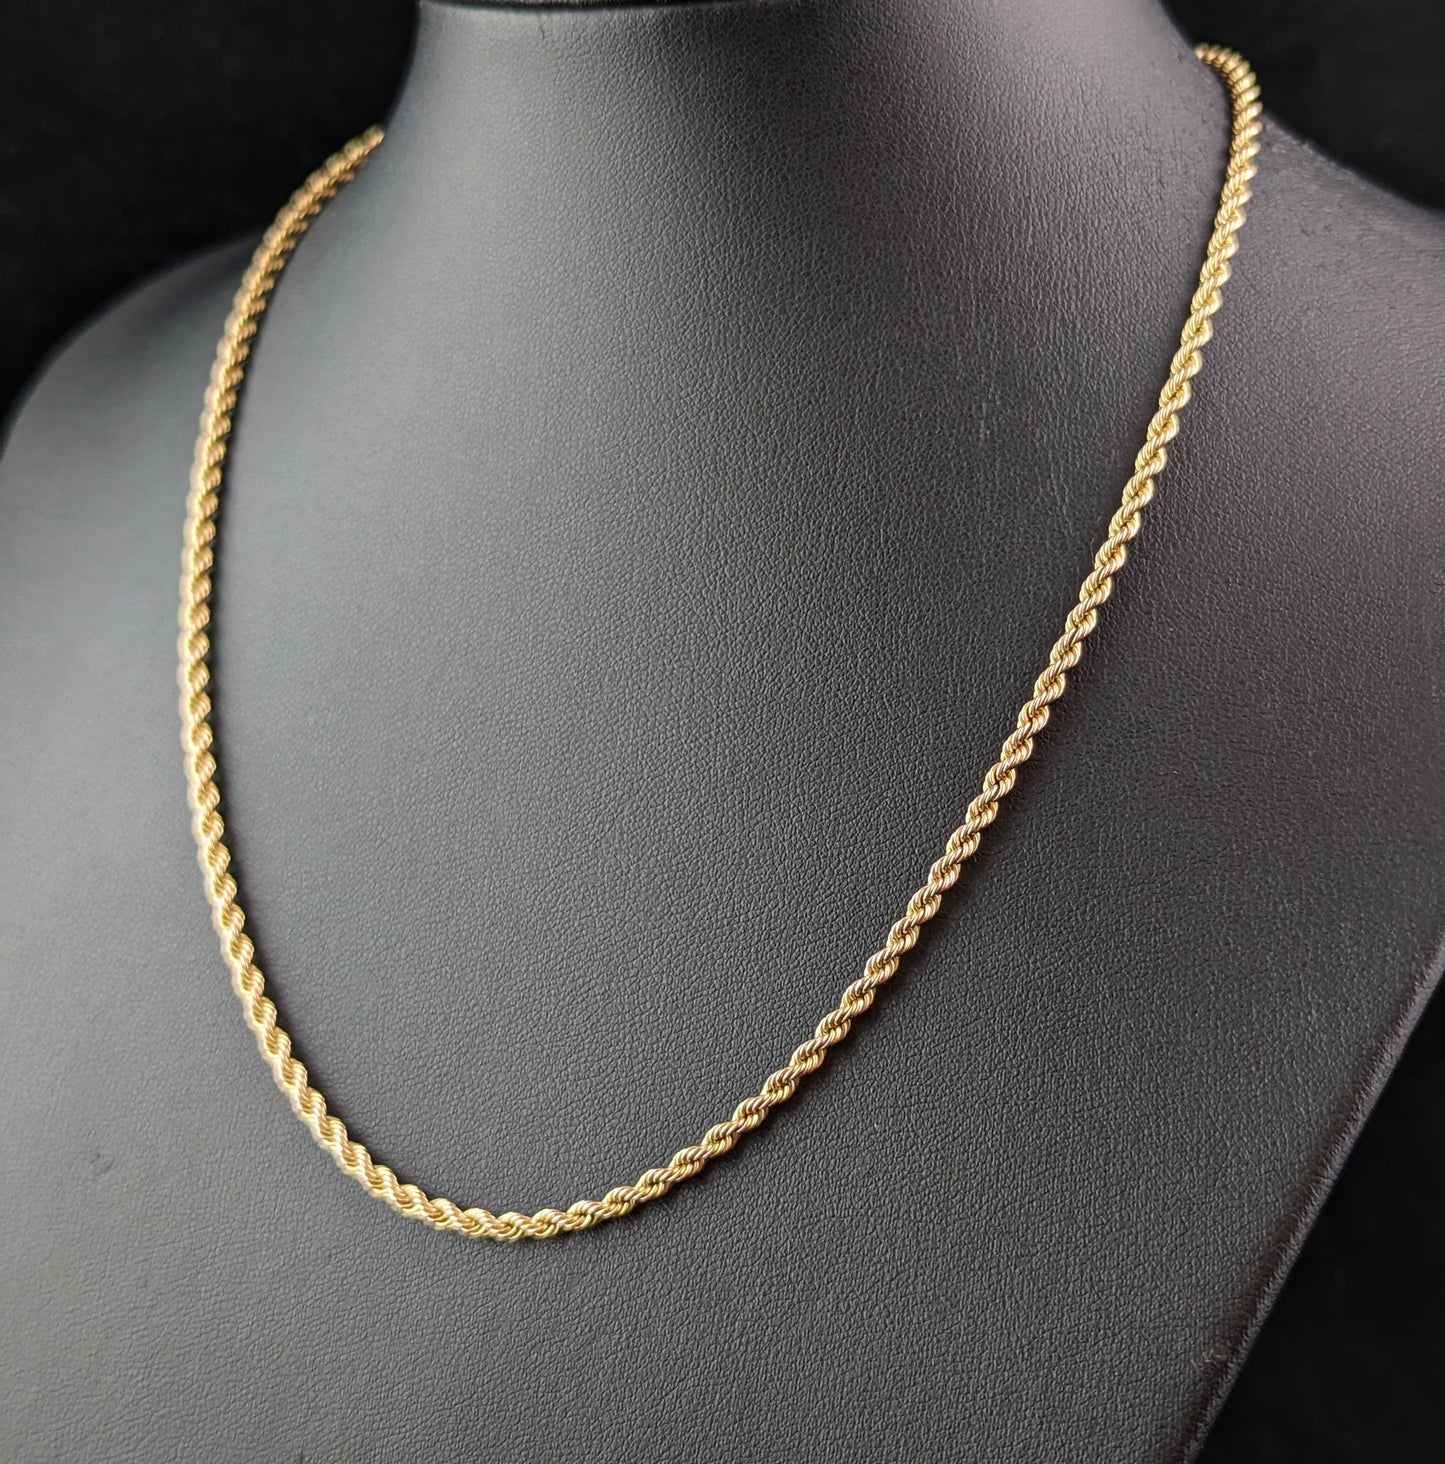 Vintage 9ct gold rope twist chain necklace